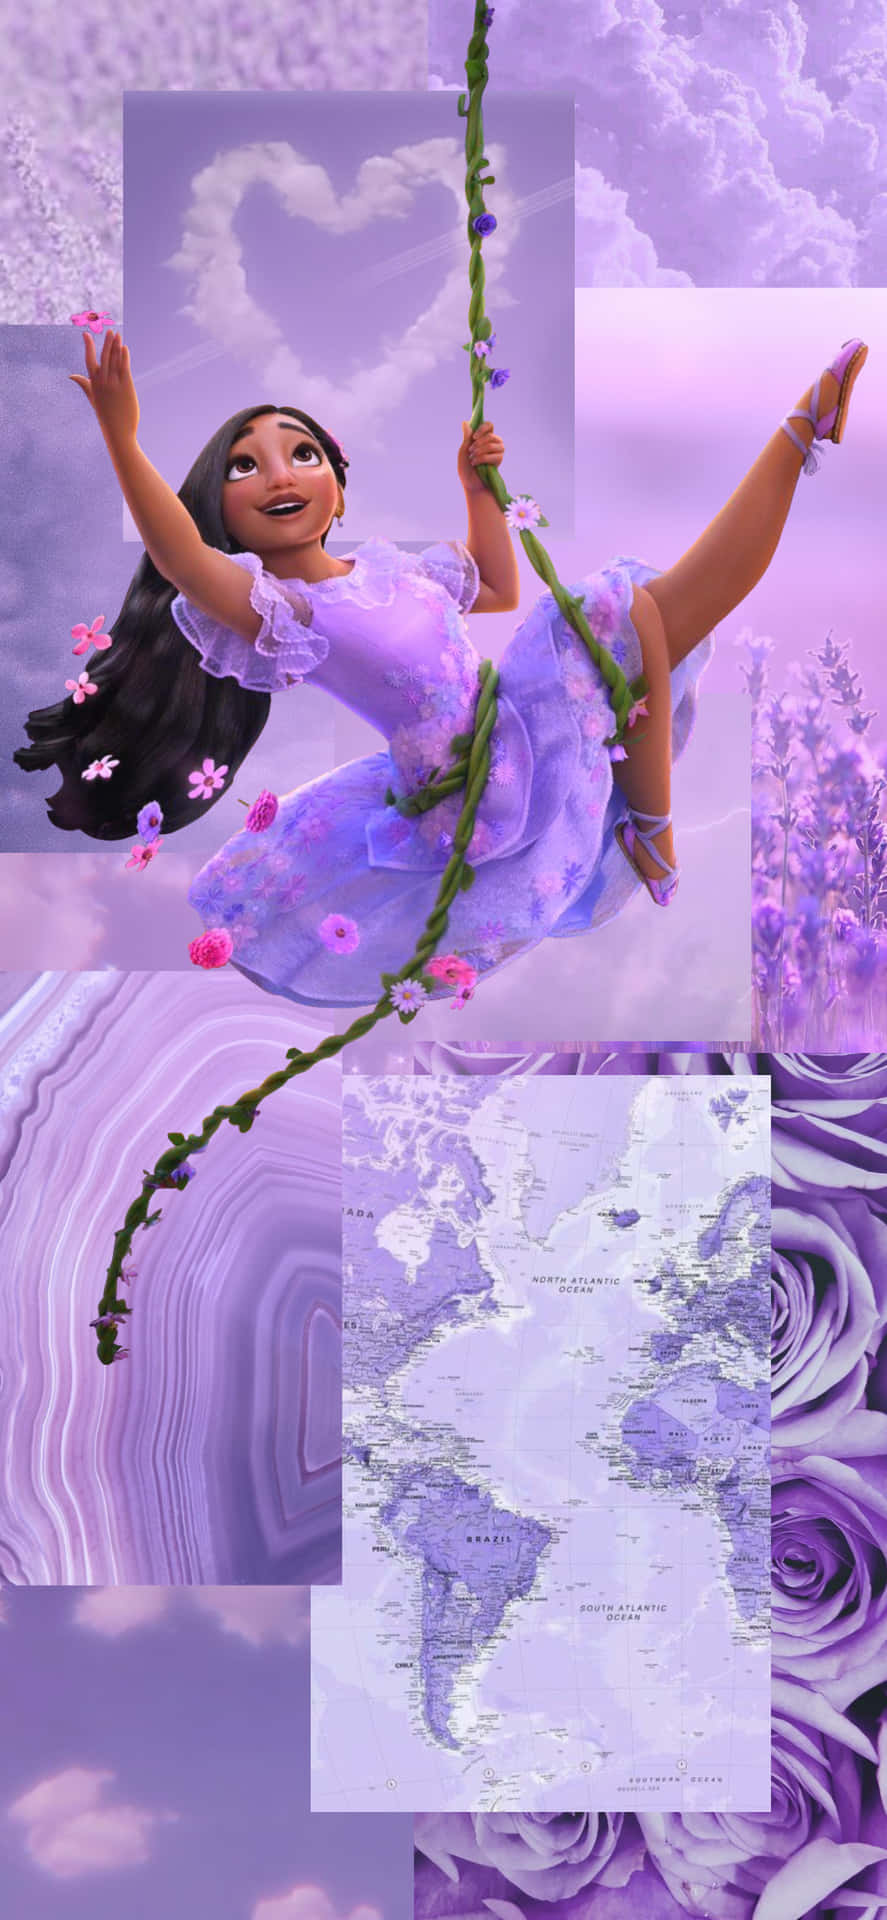 A Collage Of Pictures Of A Girl In Purple Wallpaper